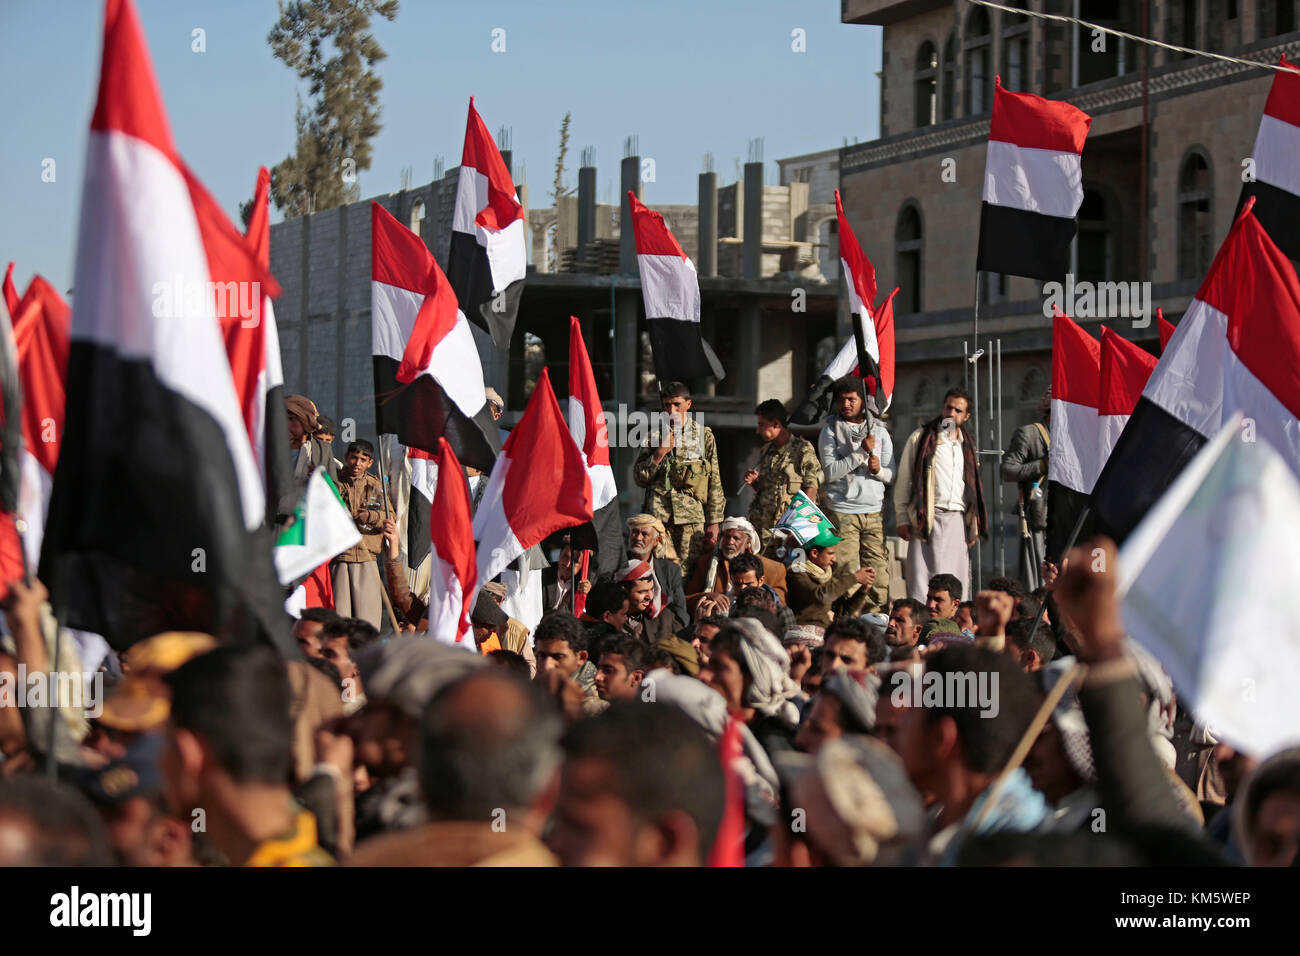 Sanaa, Yemen. 05th Dec, 2017. Supporters of Yemen's Shiite Houthi rebels take part in a rally celebrating the death of Yemen's former President Ali Abdullah Saleh in Sanaa, Yemen, 05 December 2017. Saleh was killed by the Houthi rebels on Monday. Credit: Hani Al-Ansi/dpa/Alamy Live News Stock Photo